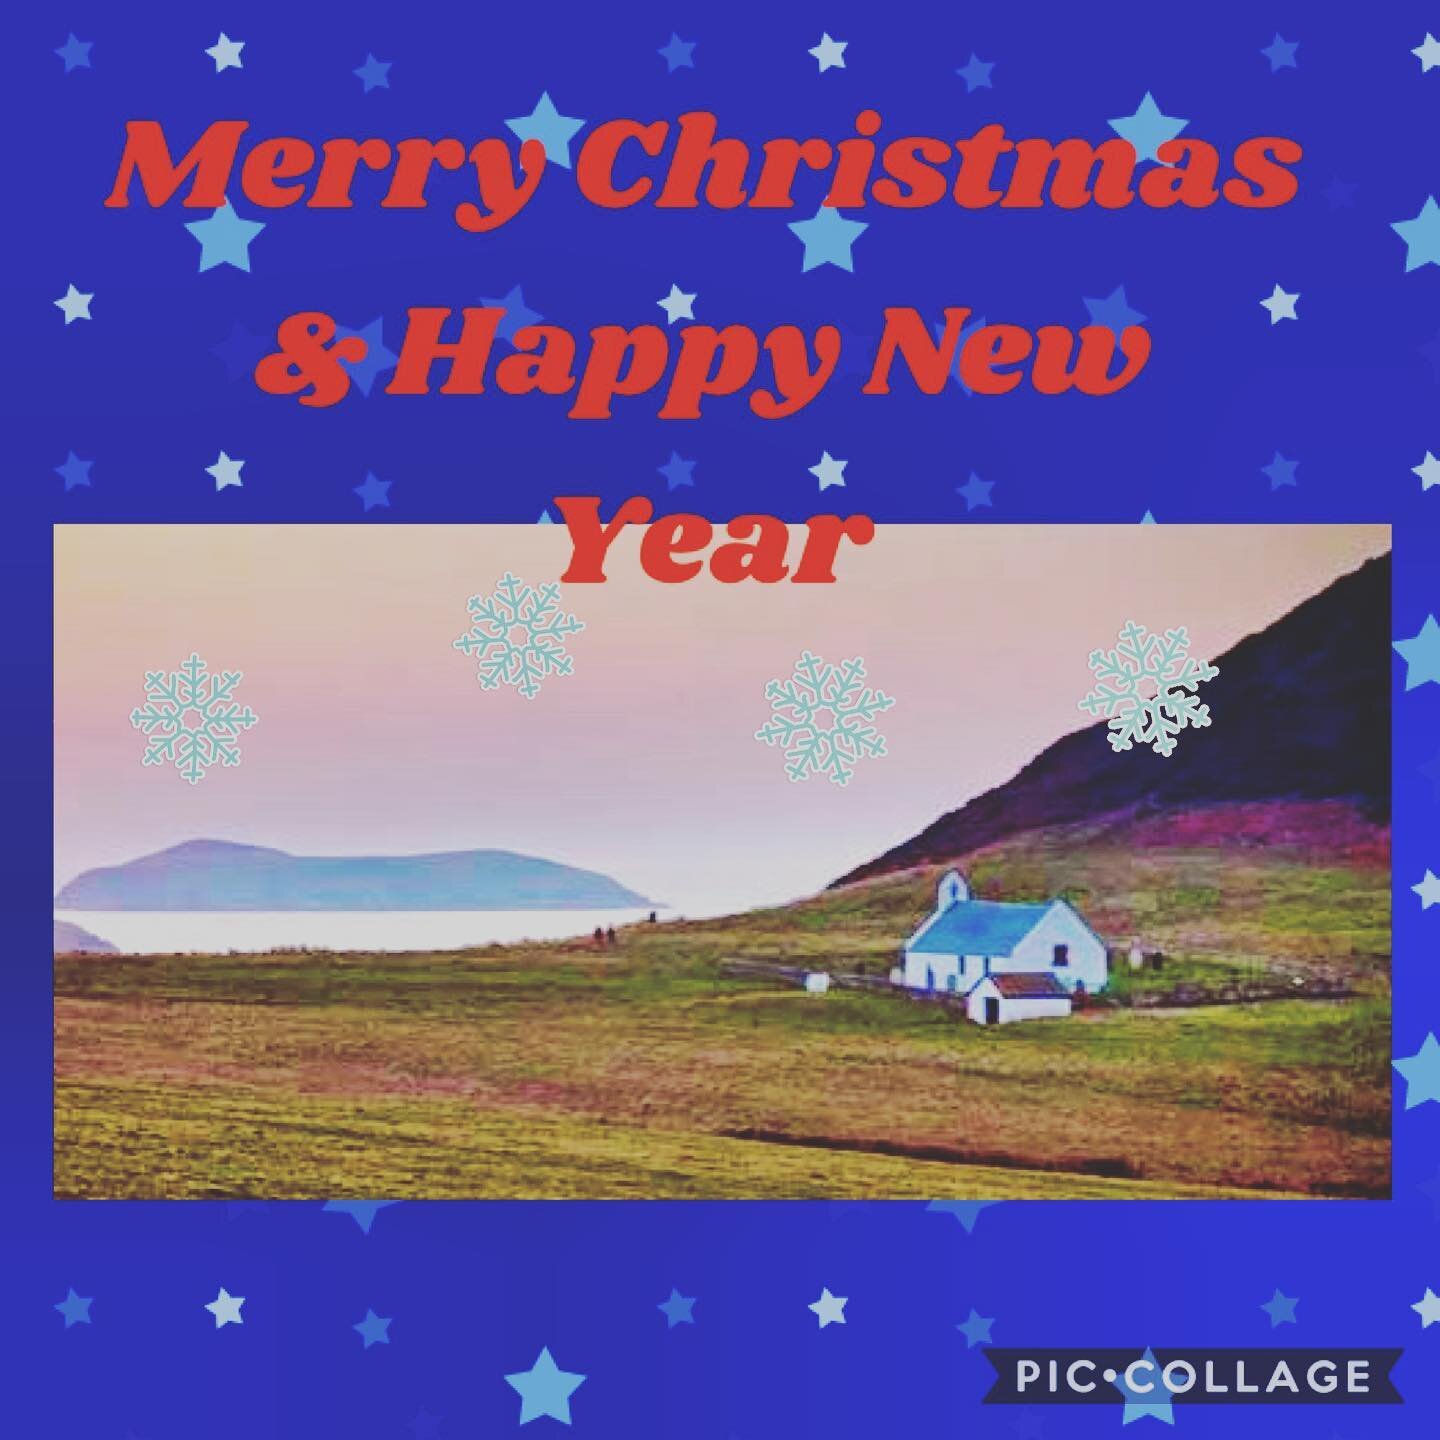 🌟🎄🌟🎄🌟🎄🌟🎄🌟🎄🌟🎄🌟🎄🌟🎄🌟
As we wish all our friends, neighbours and customers a Merry Christmas, we would also like to thank you all for your support and understanding during an extremely challenging year. We look forward to better New Year